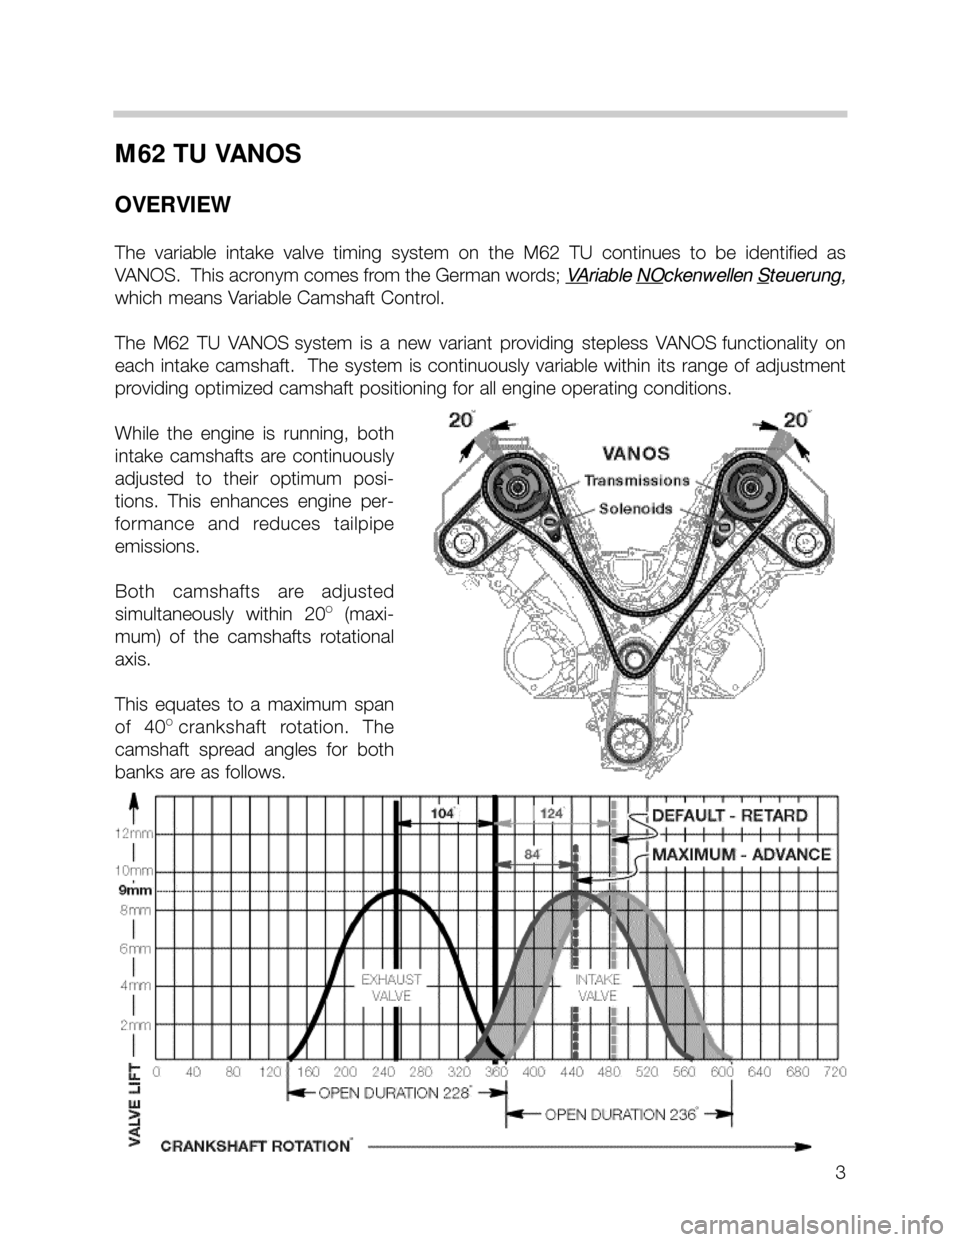 BMW X5 2001 E53 M62TU Engine Workshop Manual 3
M62 TU VANOS
OVERVIEW
The  variable  intake  valve  timing  system  on  the  M62  TU  continues  to  be  identified  as
VANOS.  This acronym comes from the German words; V
Ariable NOckenwellen Steue